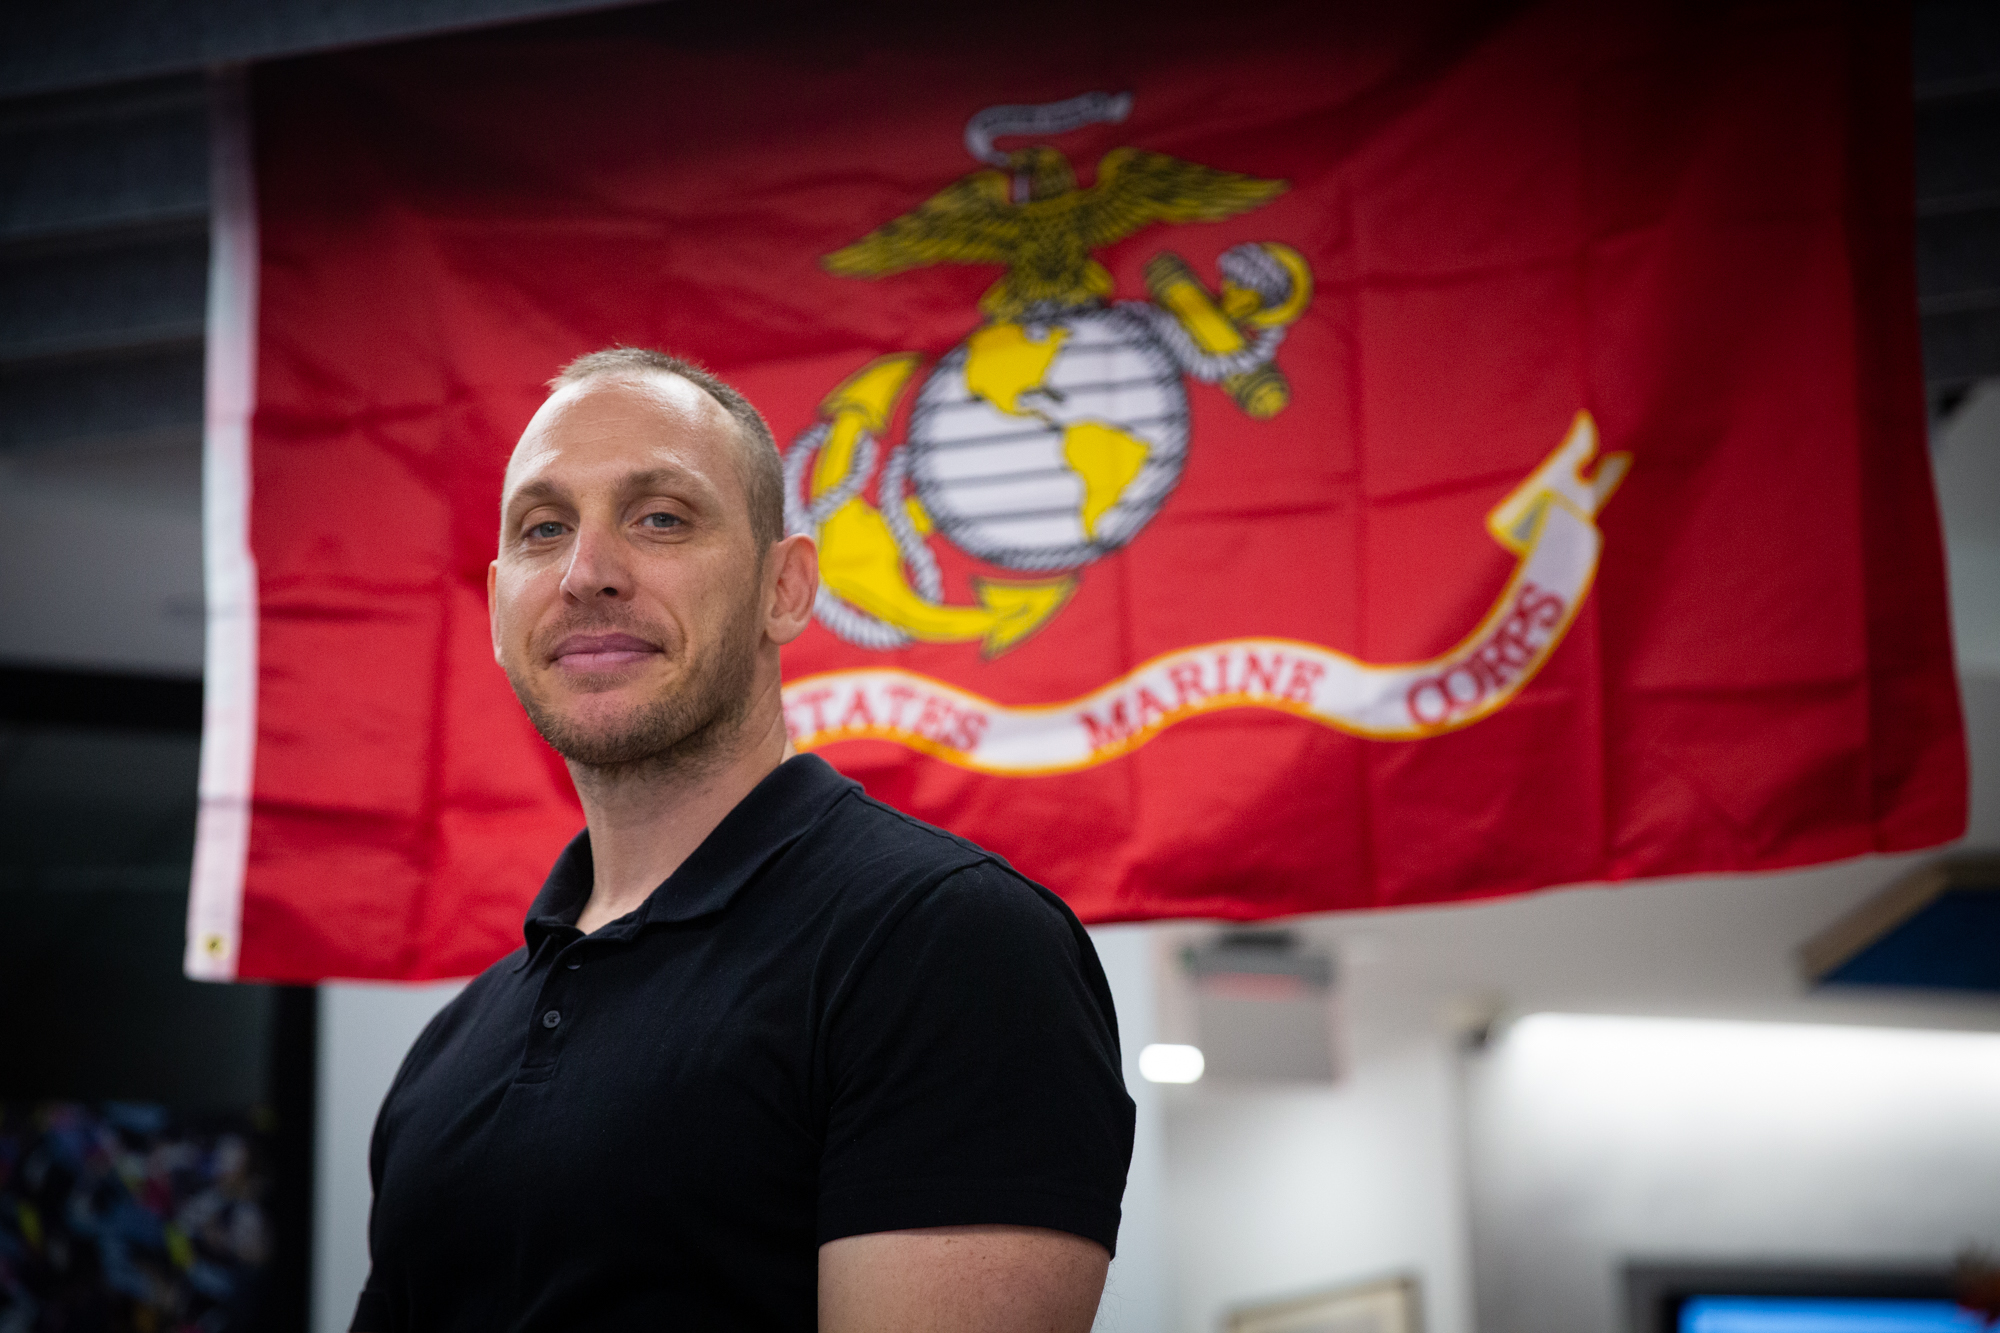 Aaron Autler stands in front of a flag reading "United States Marine Corps"